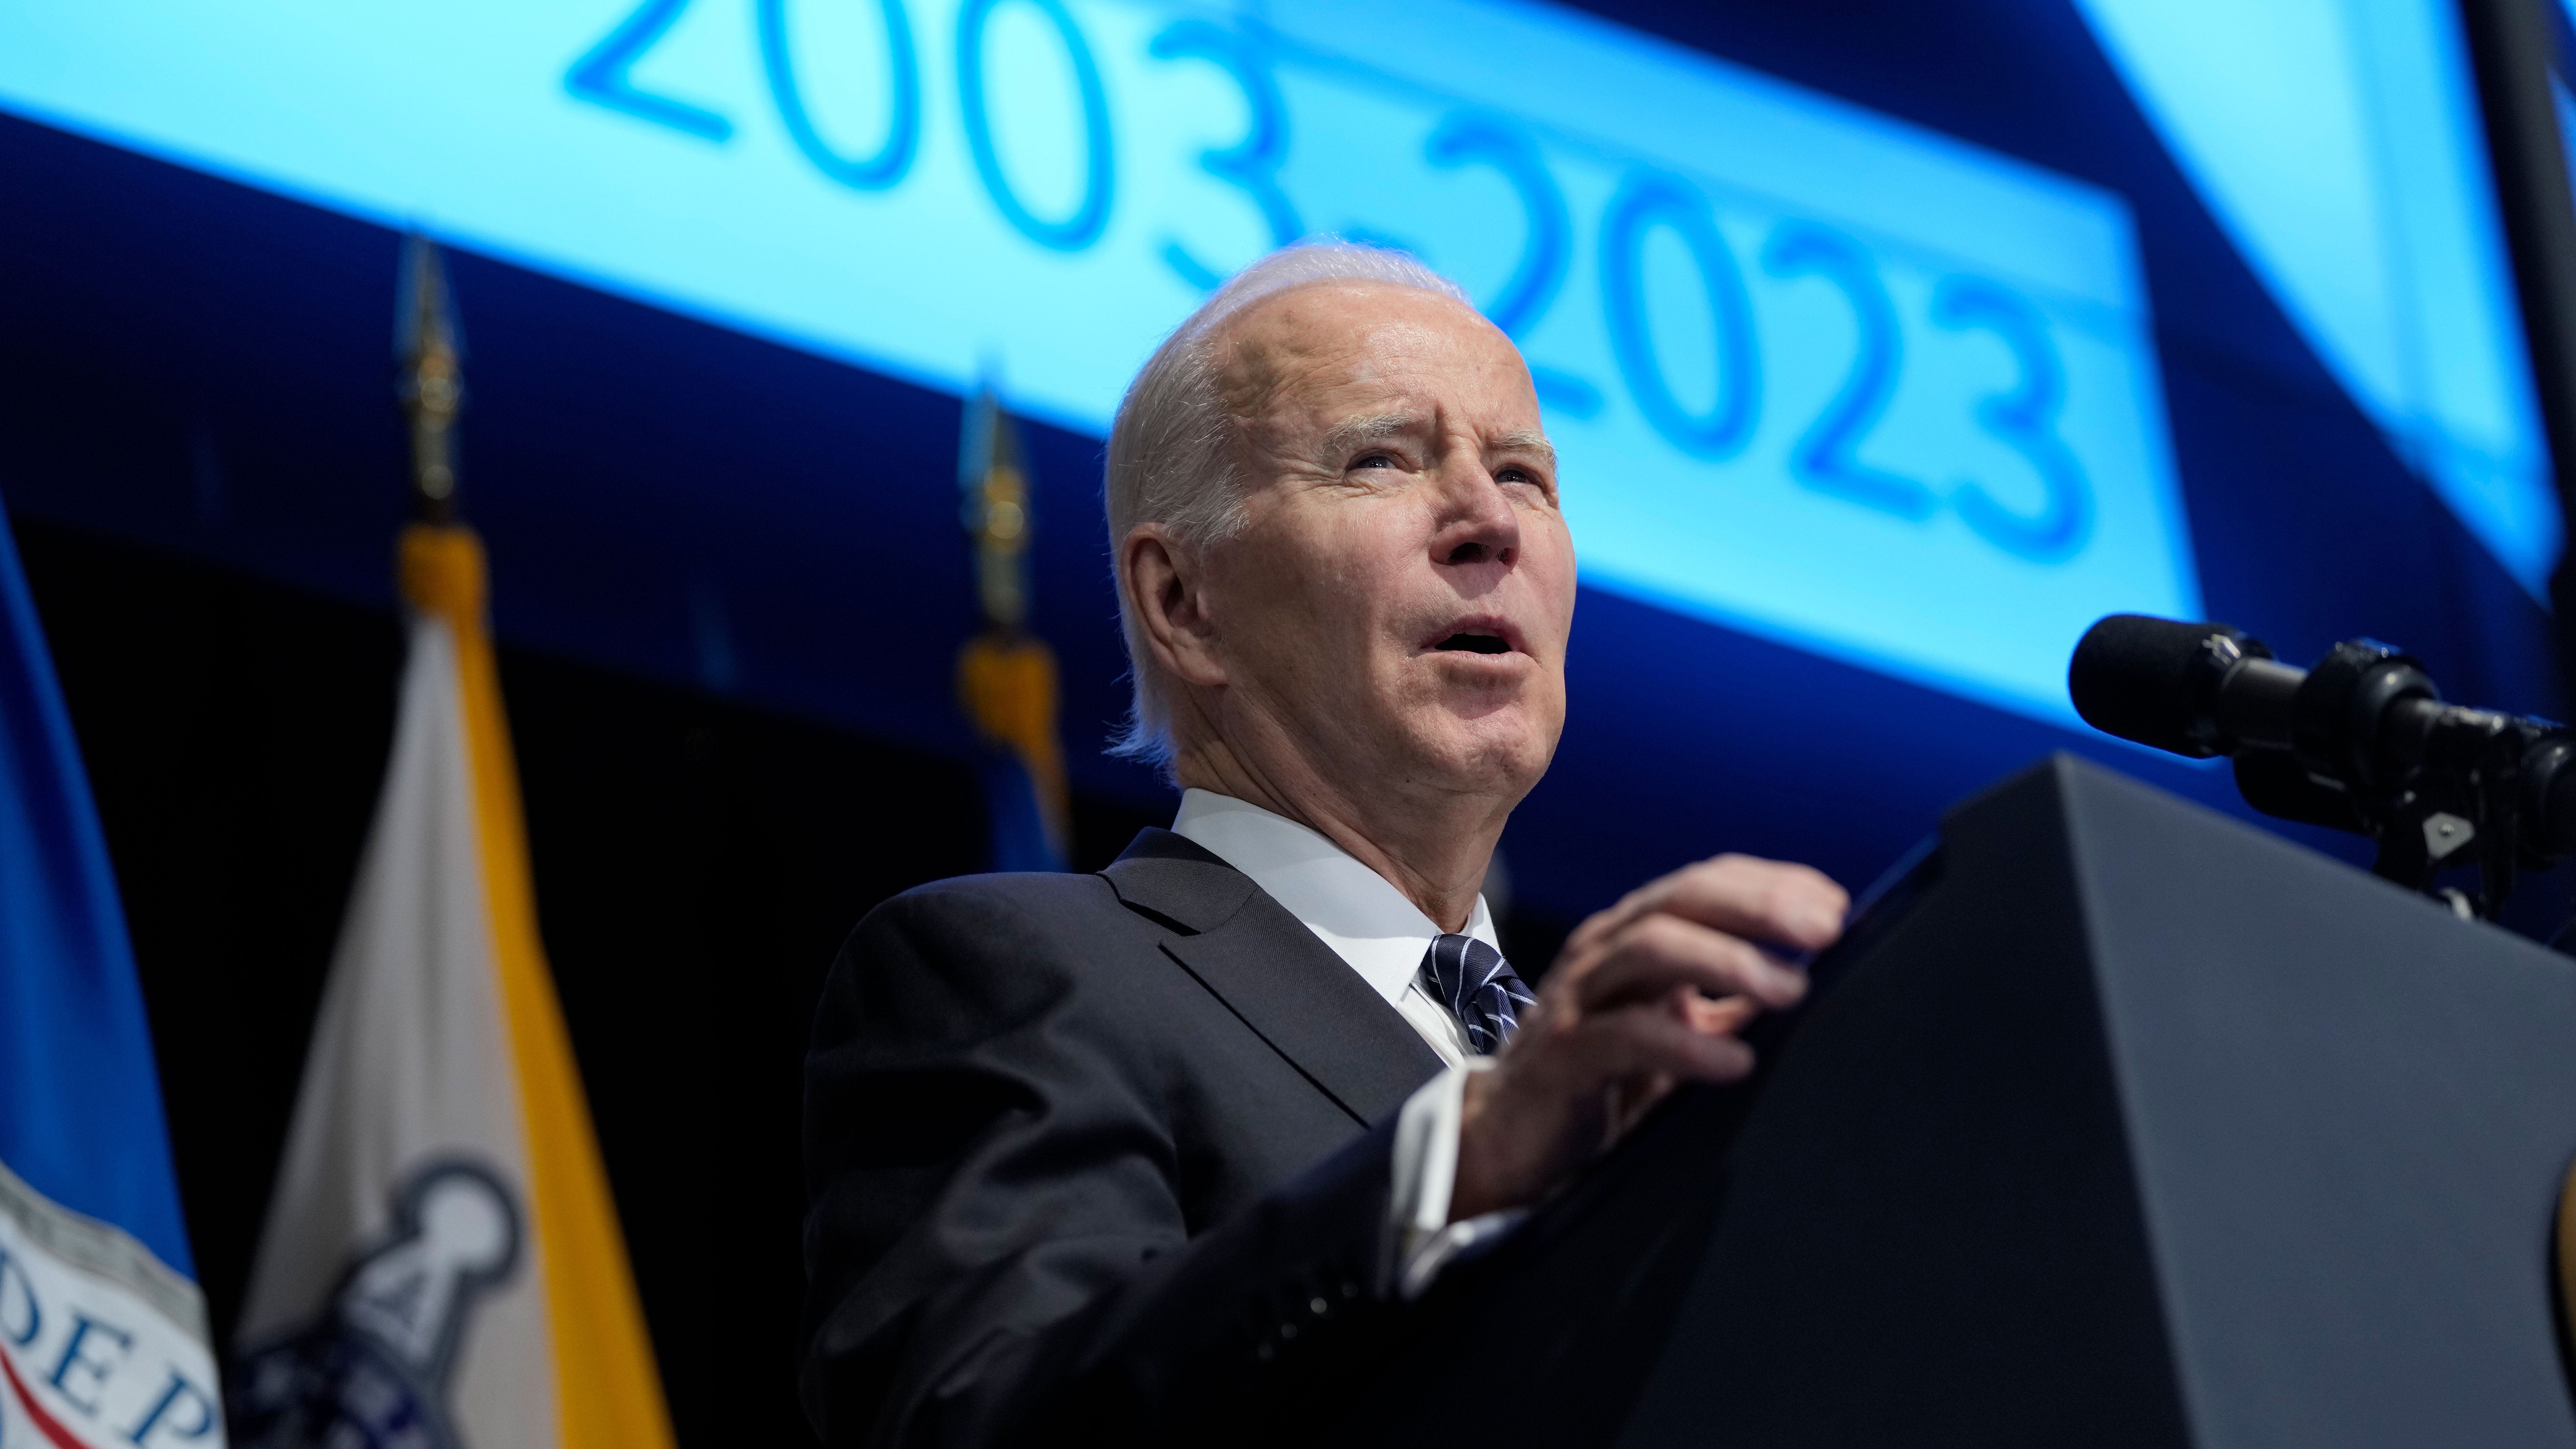 Biden vows to ban assault weapons 'come hell or high water'